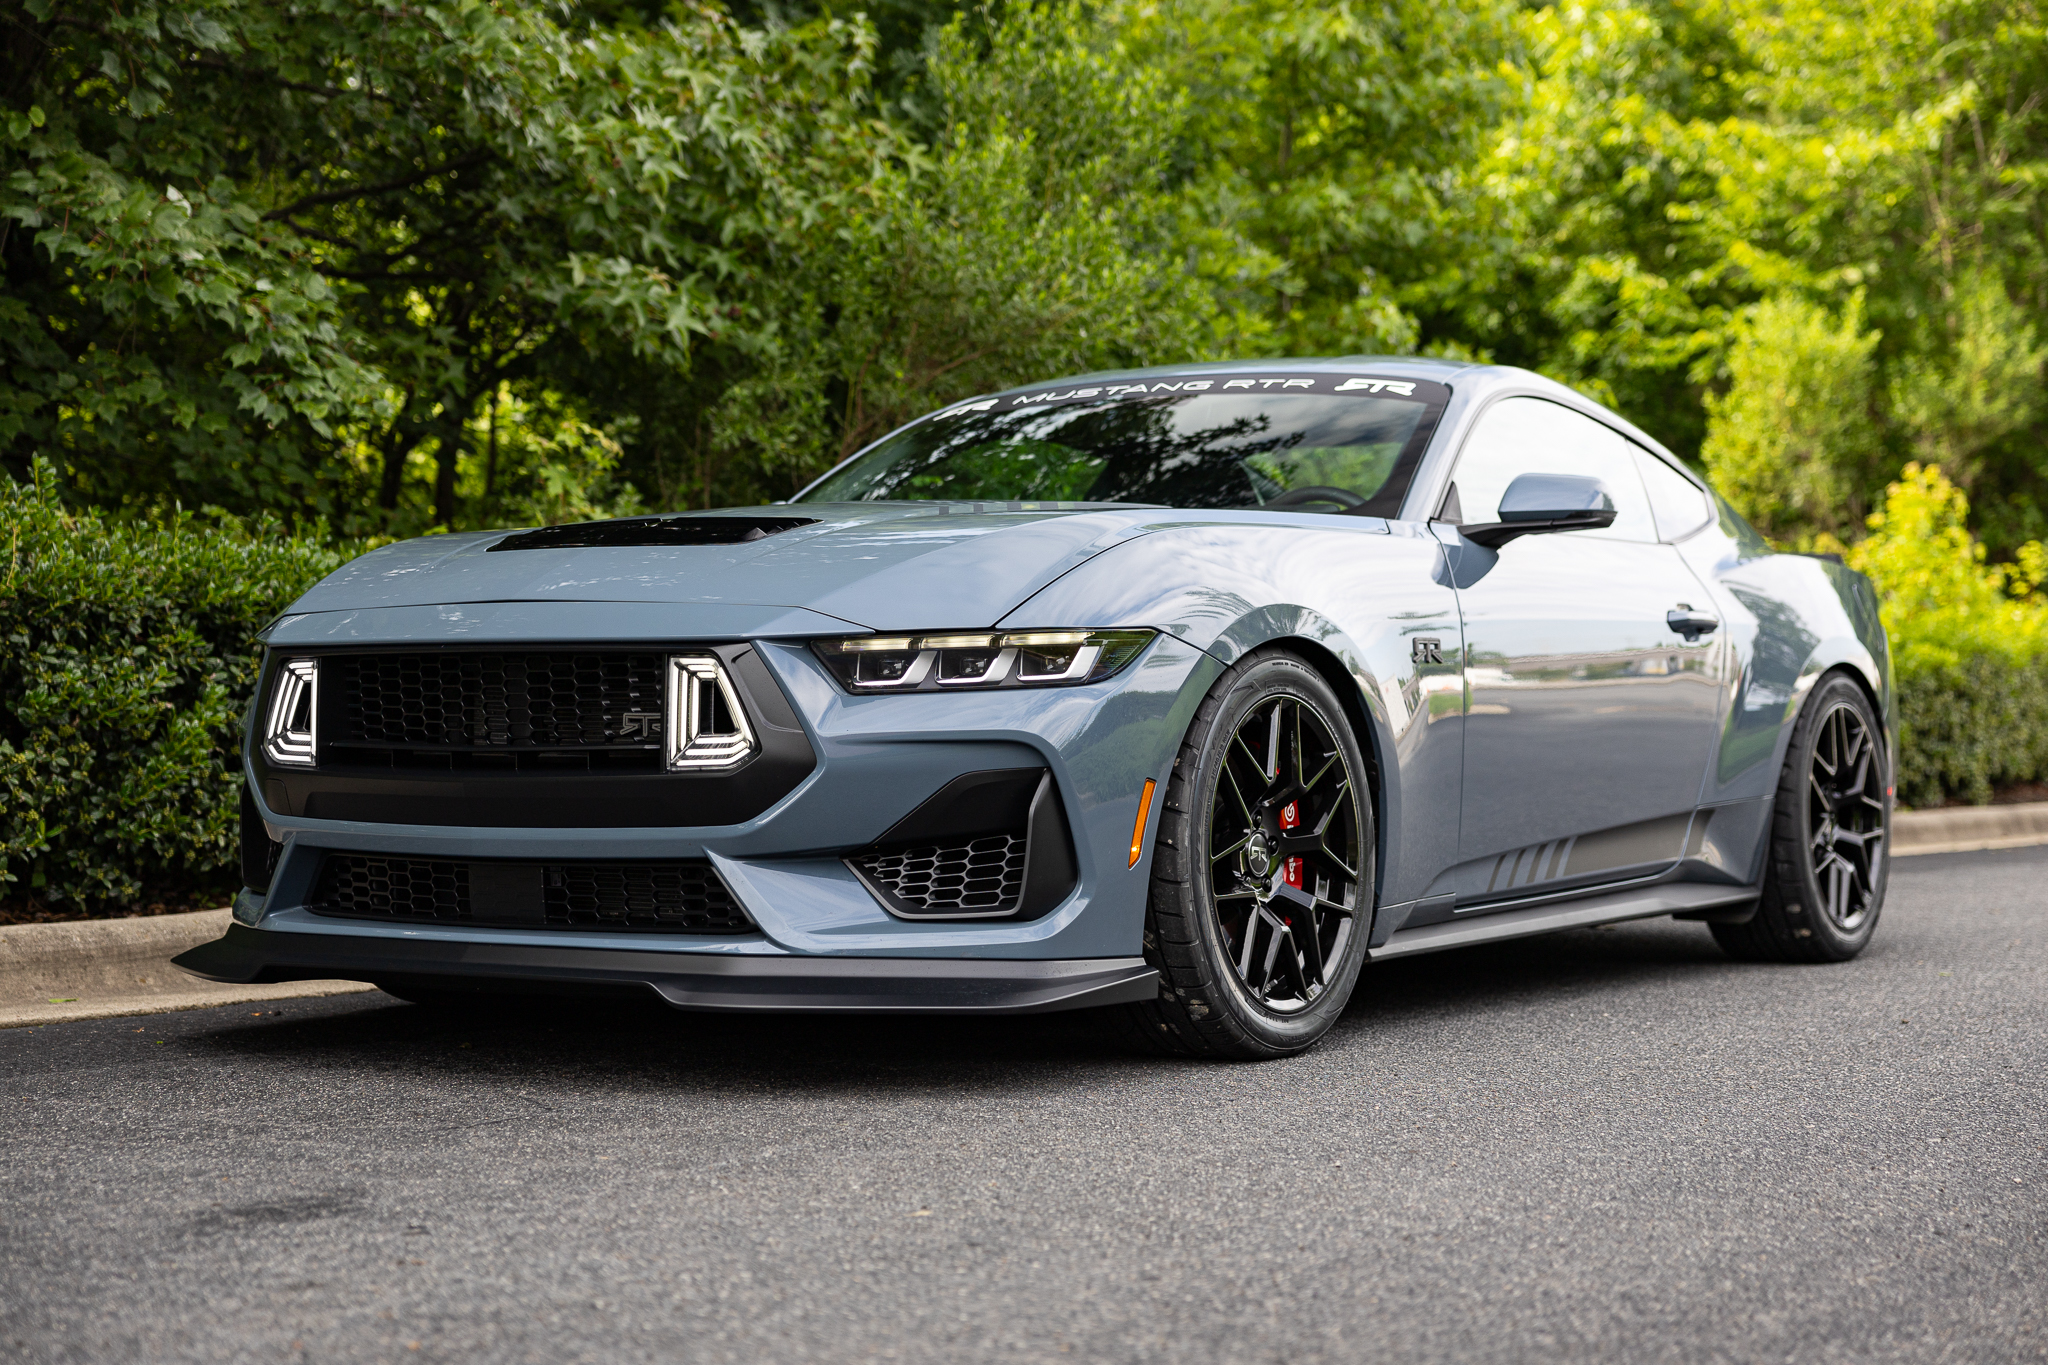 S650 Mustang Mustang RTR Spec 1 Package Introduced for International Market JCOL7185